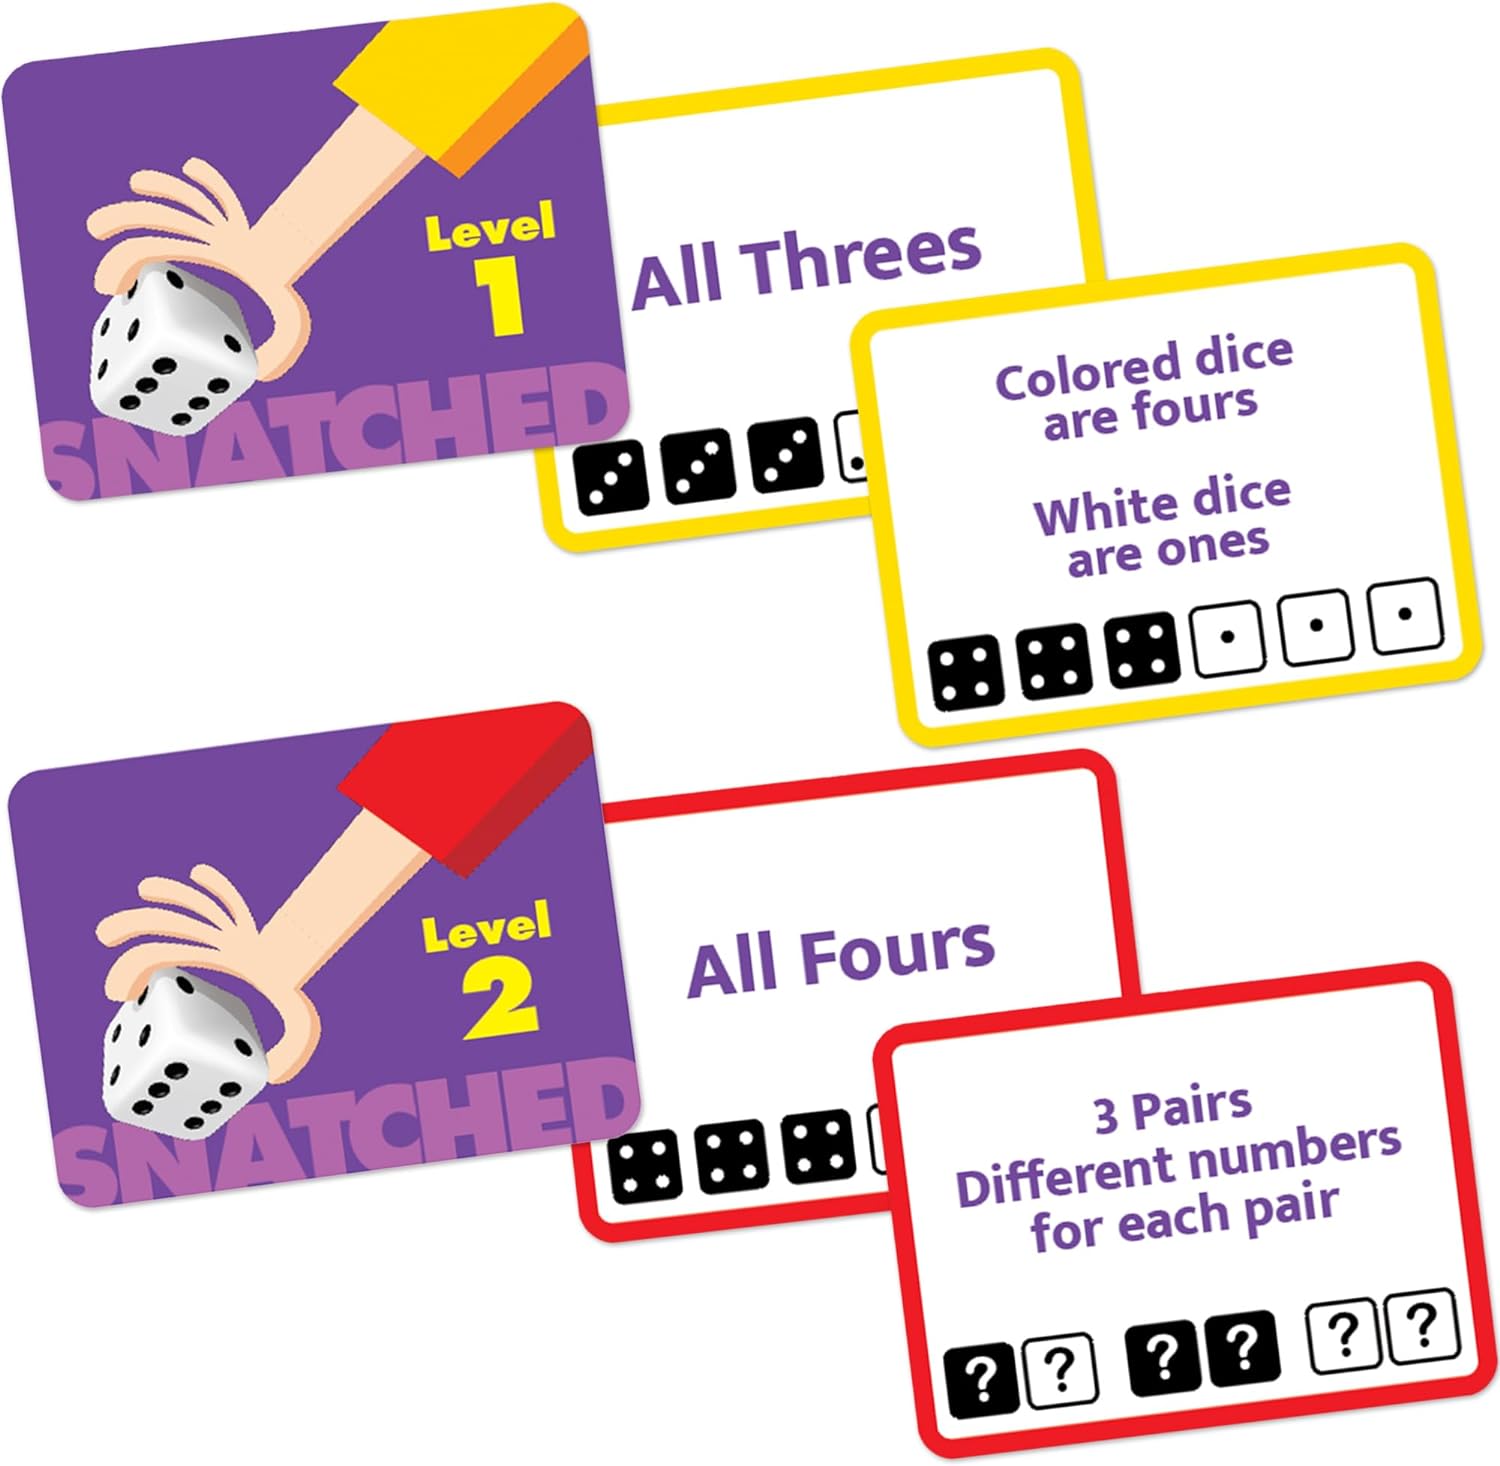 Gamie Snatched Dice Rolling Game - Quick Thinking Math Games for Kids - 24 Dice, 4 Racks, and 60 Challenge Cards - Teaches Subtraction, Addition, Odd and Even Numbers - for Ages 5 and Up